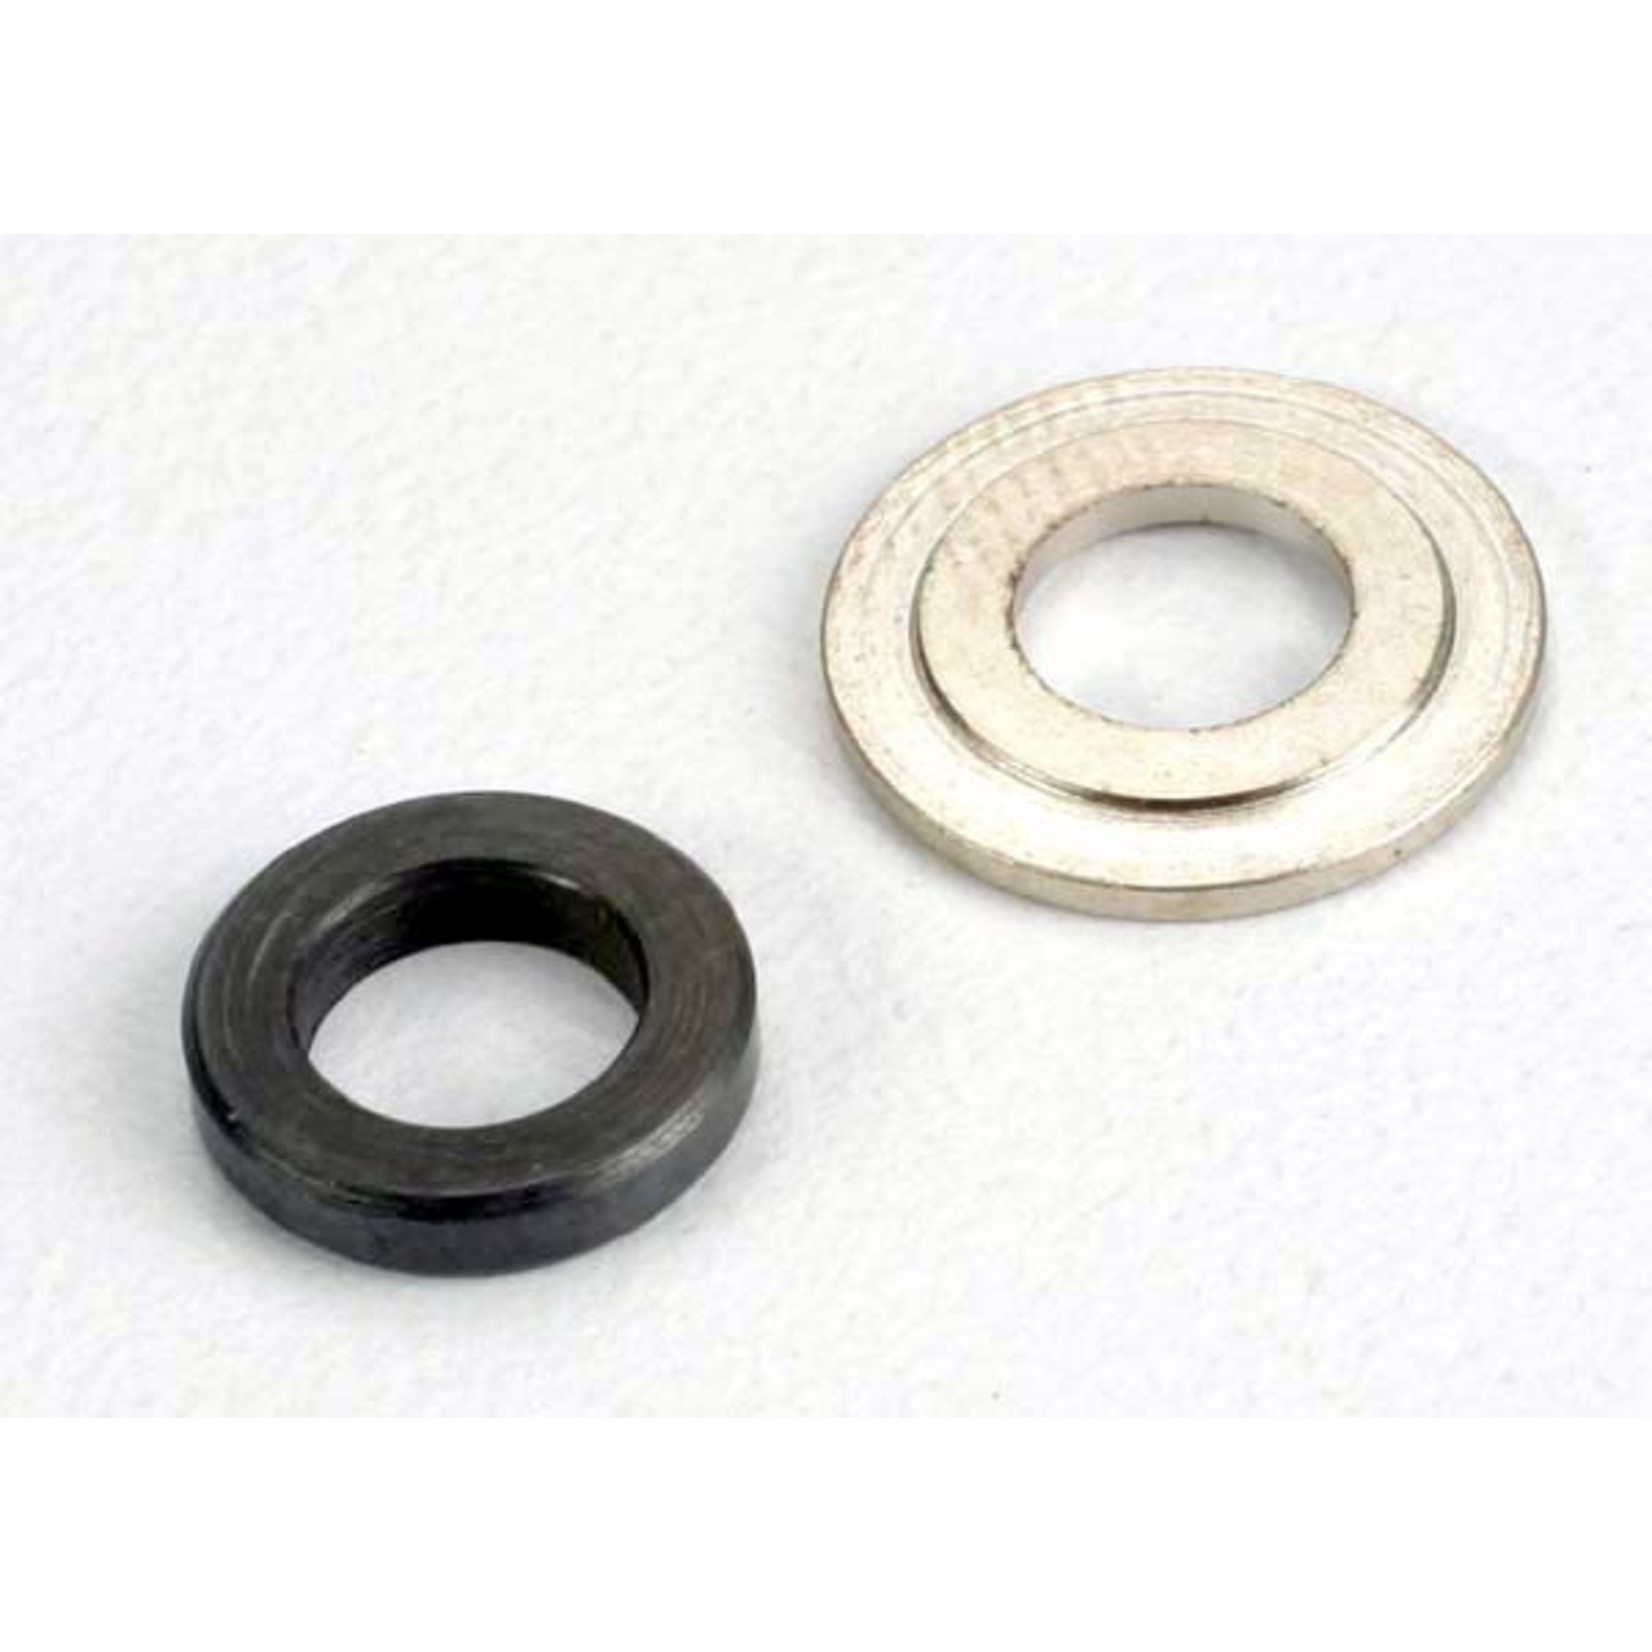 Traxxas 4027 - Bearing spacers, clutch bell 5x8.5x1.75mm (